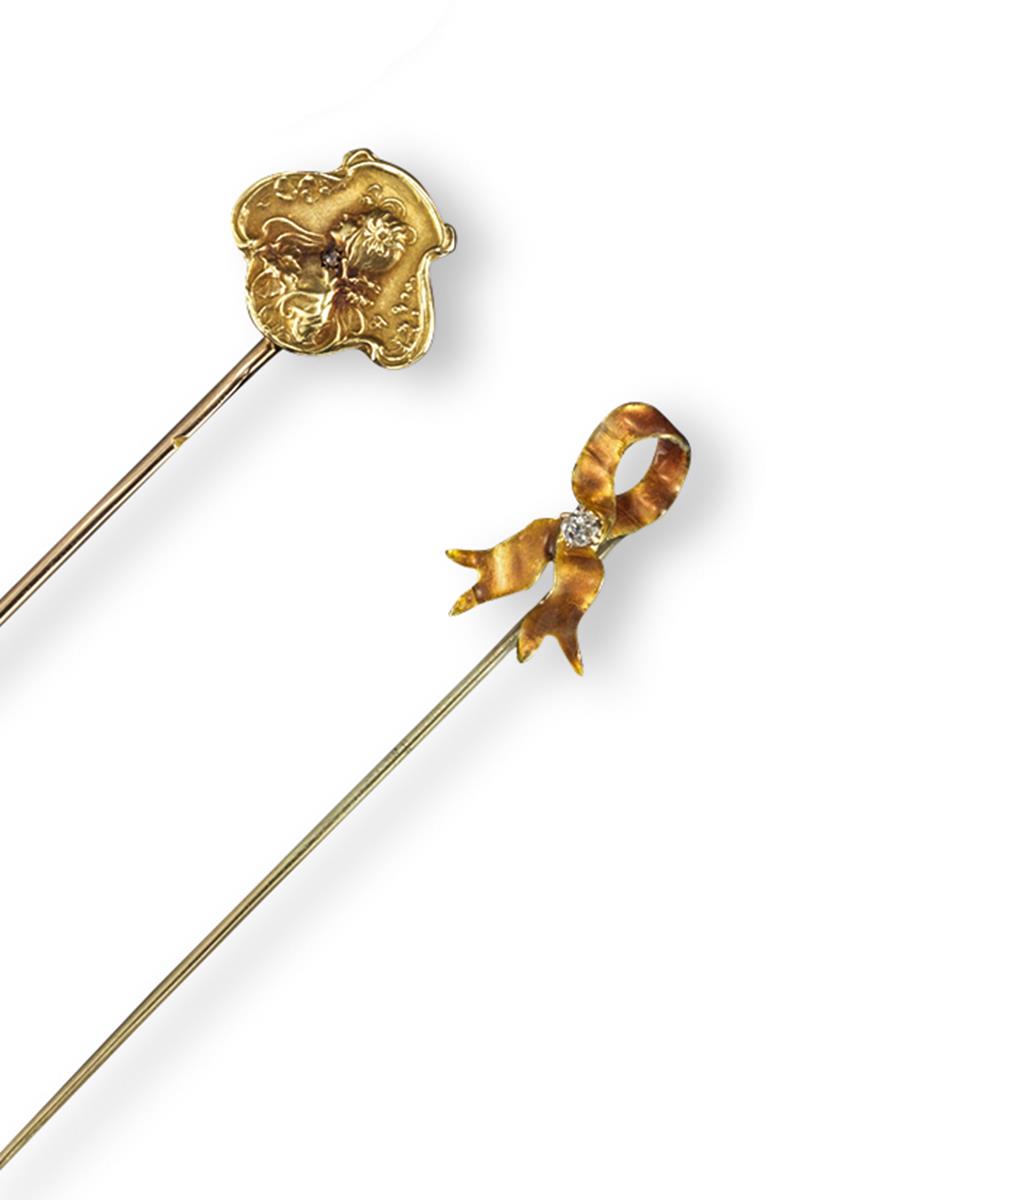 An Art Nouveau gold stickpin, depicting the profile of a young girl and set with a small diamond,